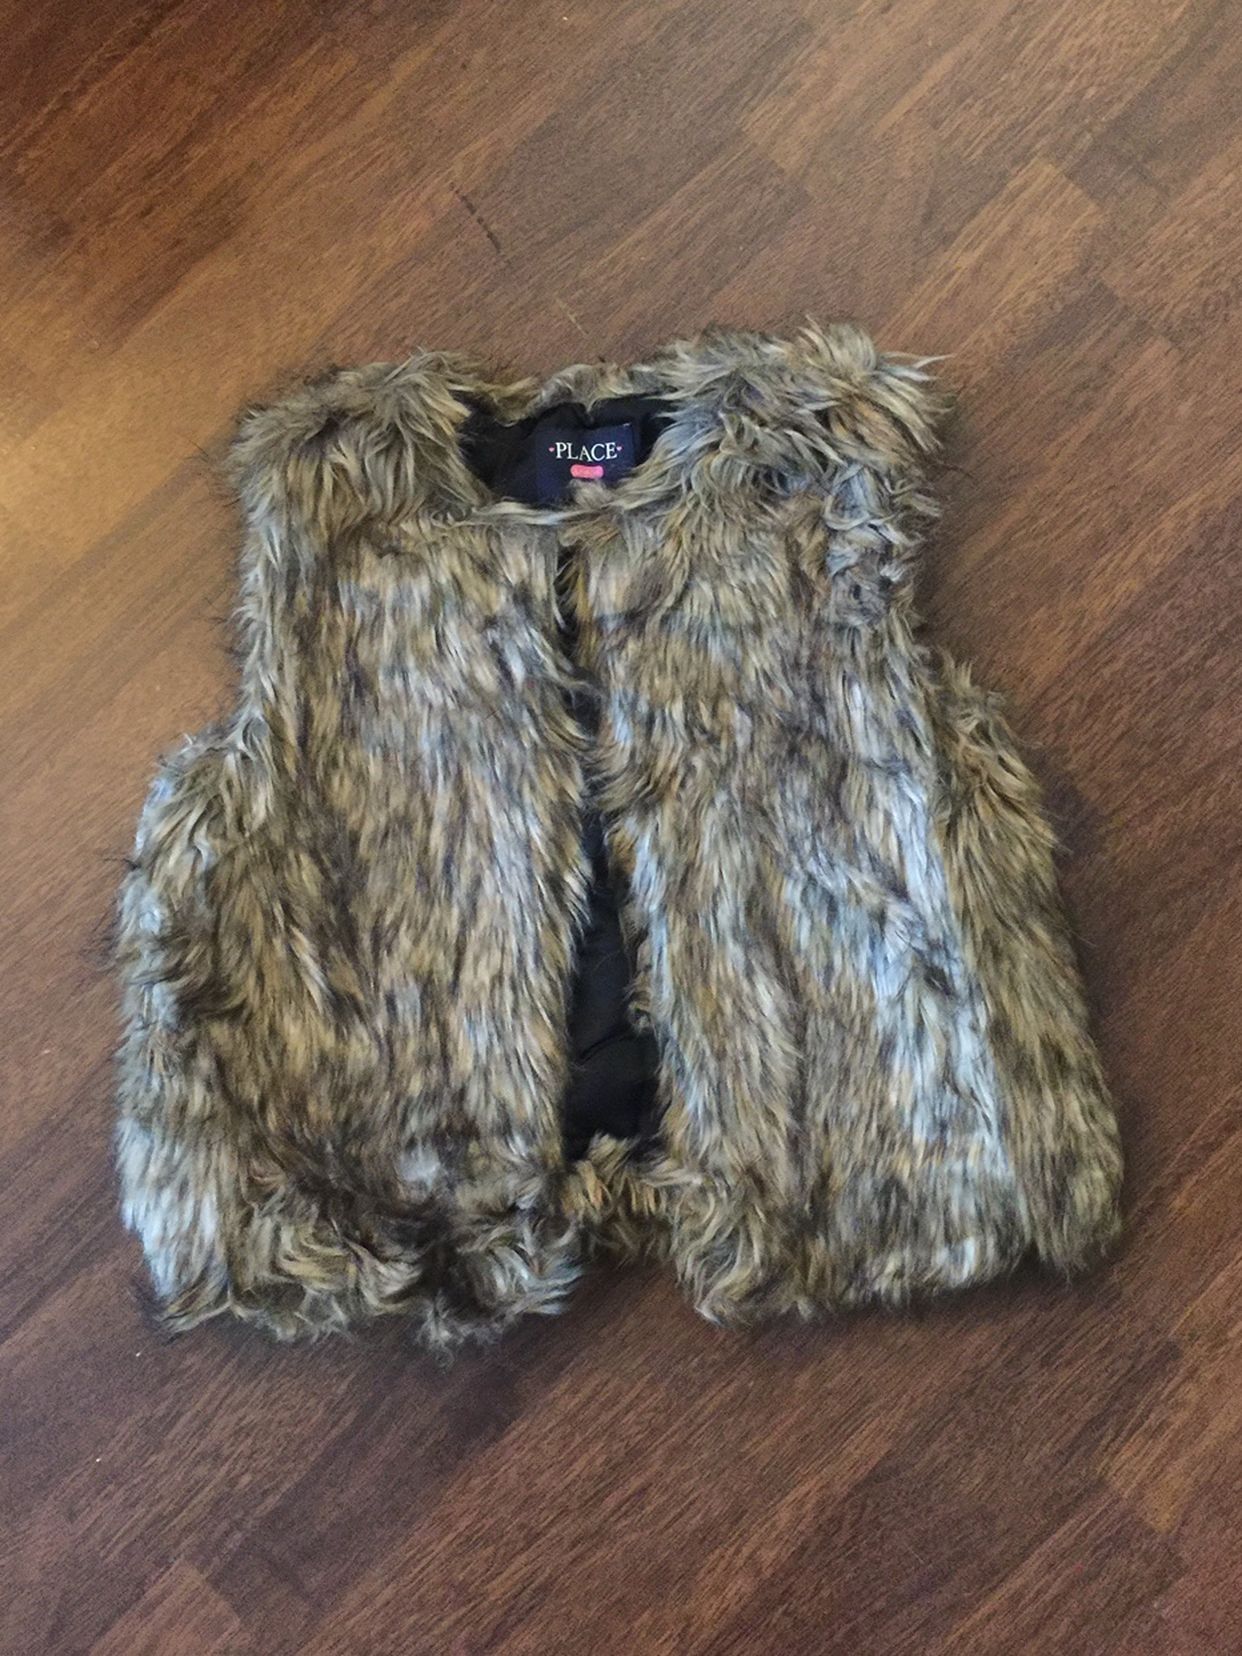 Girls Brown Fur Vest From Children’s Place Size L